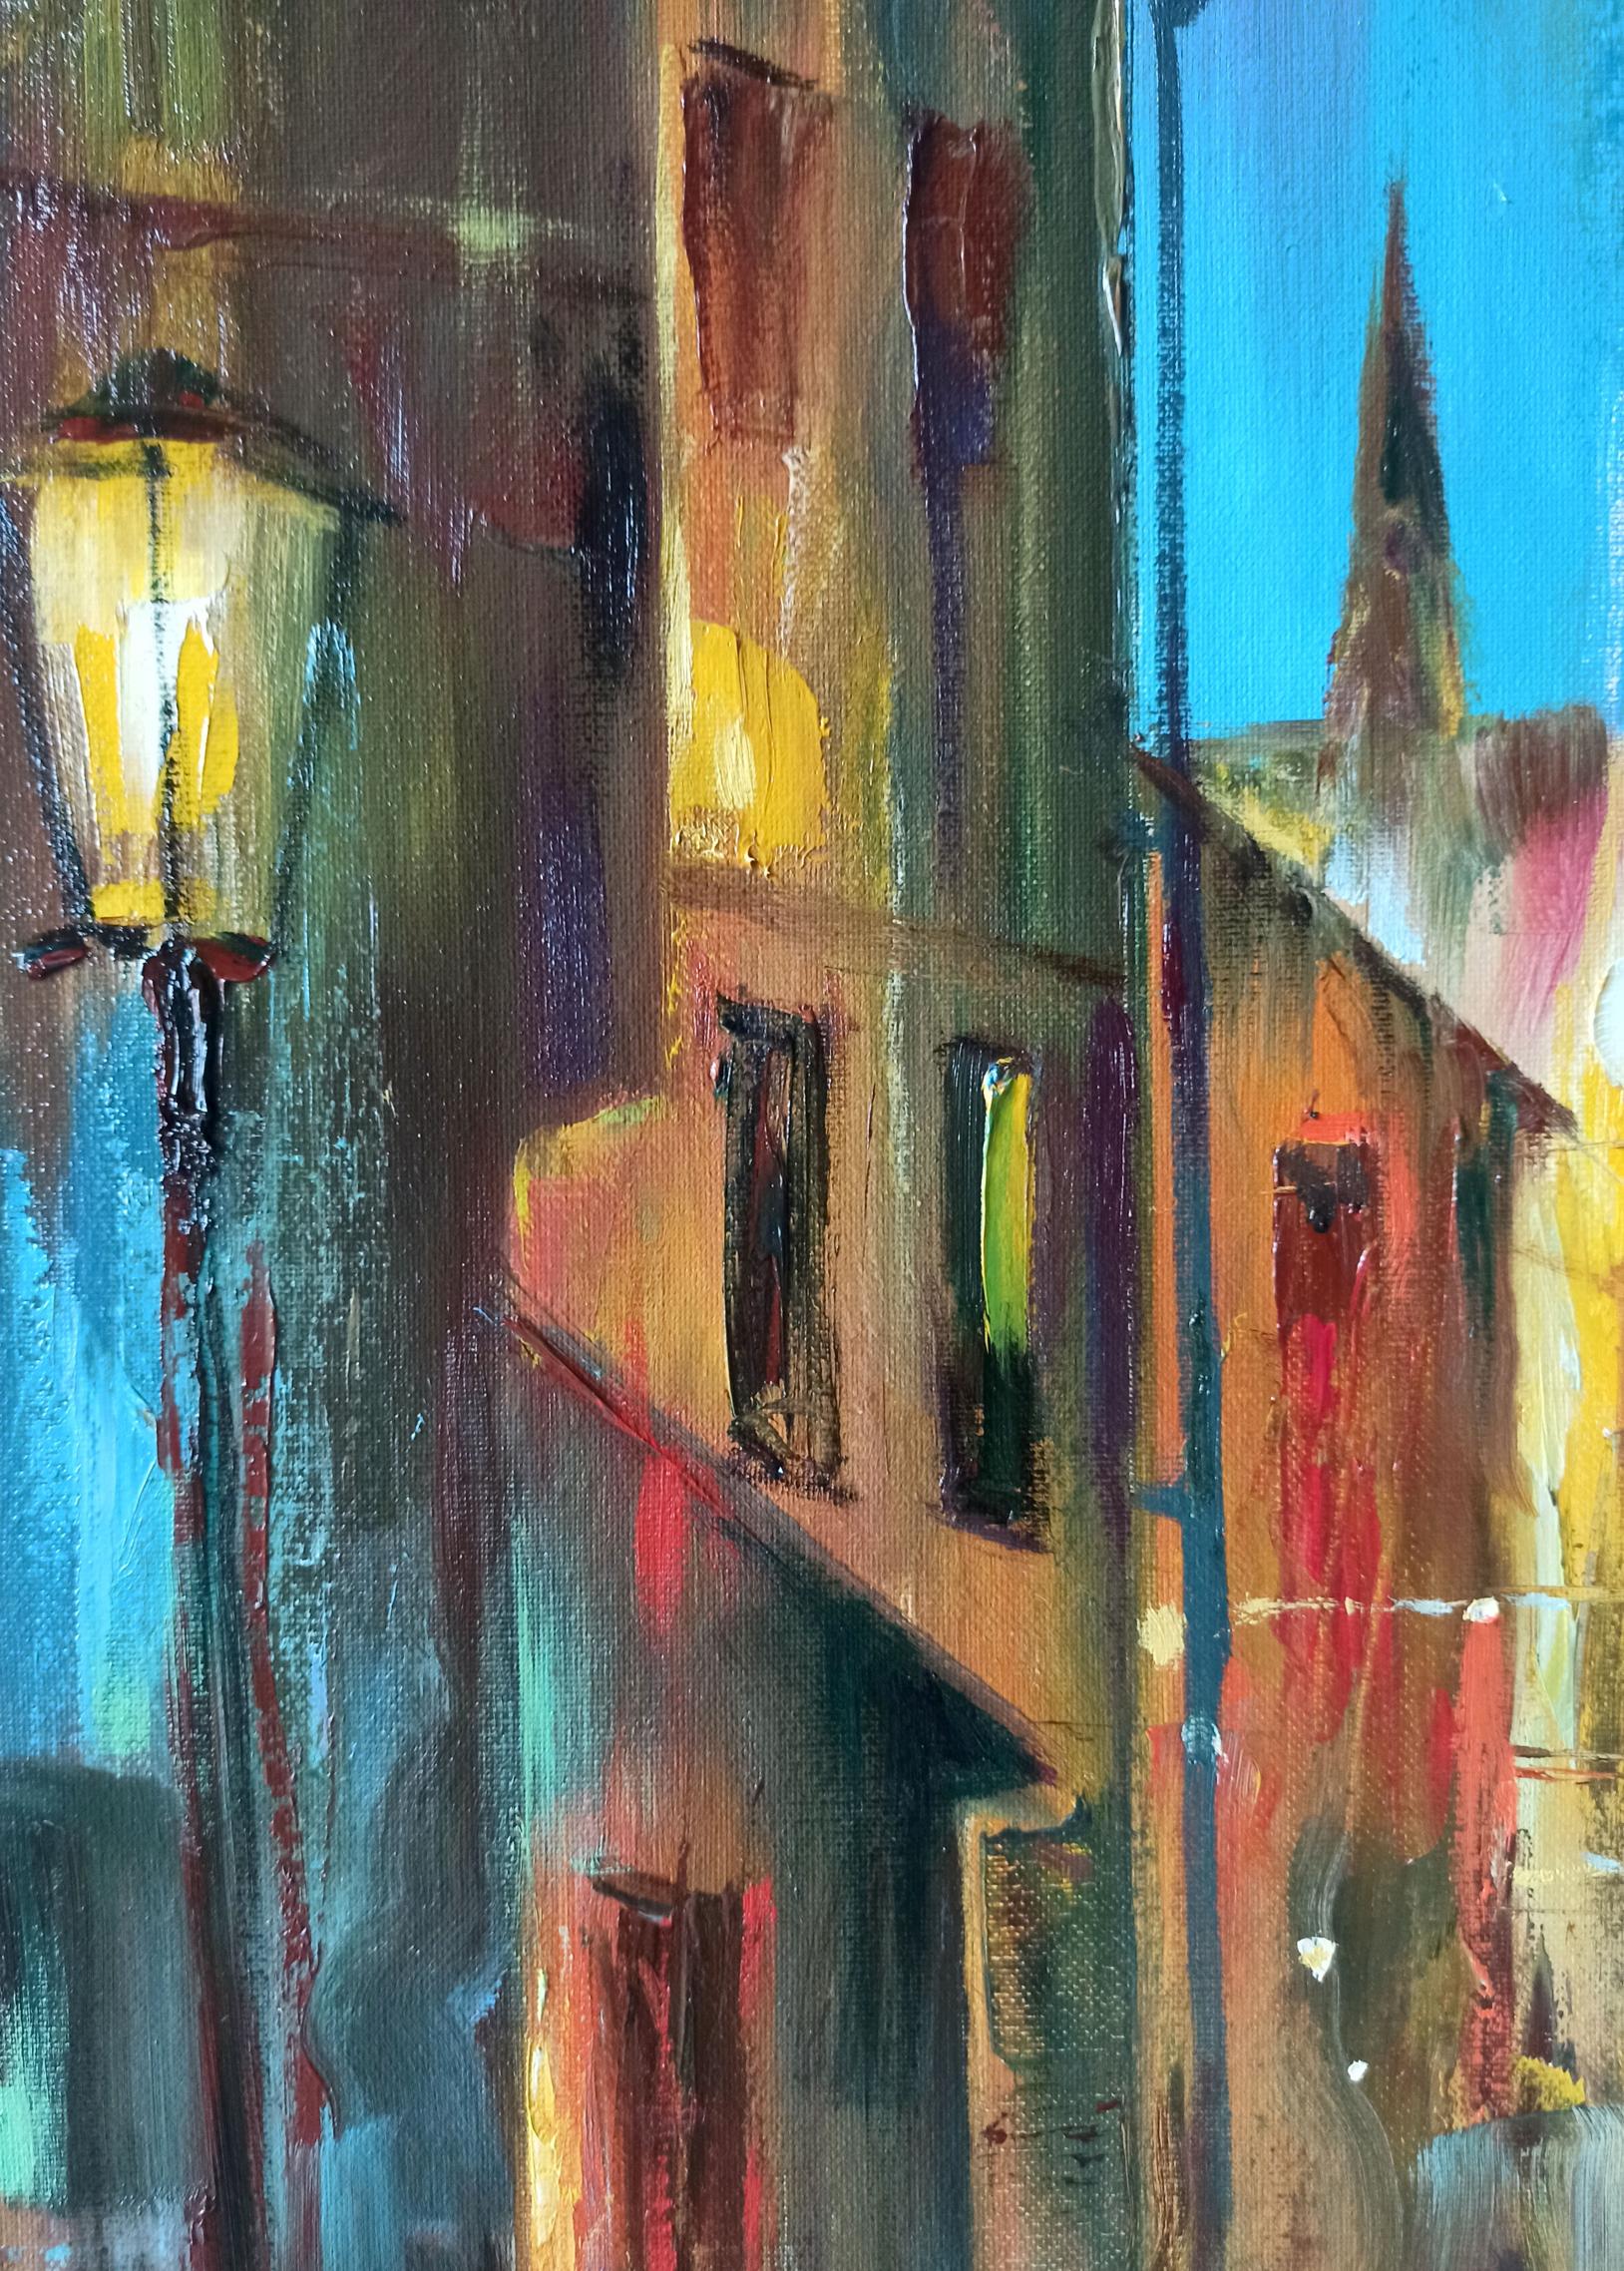 Tarabanov's abstract oil artwork transports viewers into the nighttime world of the city